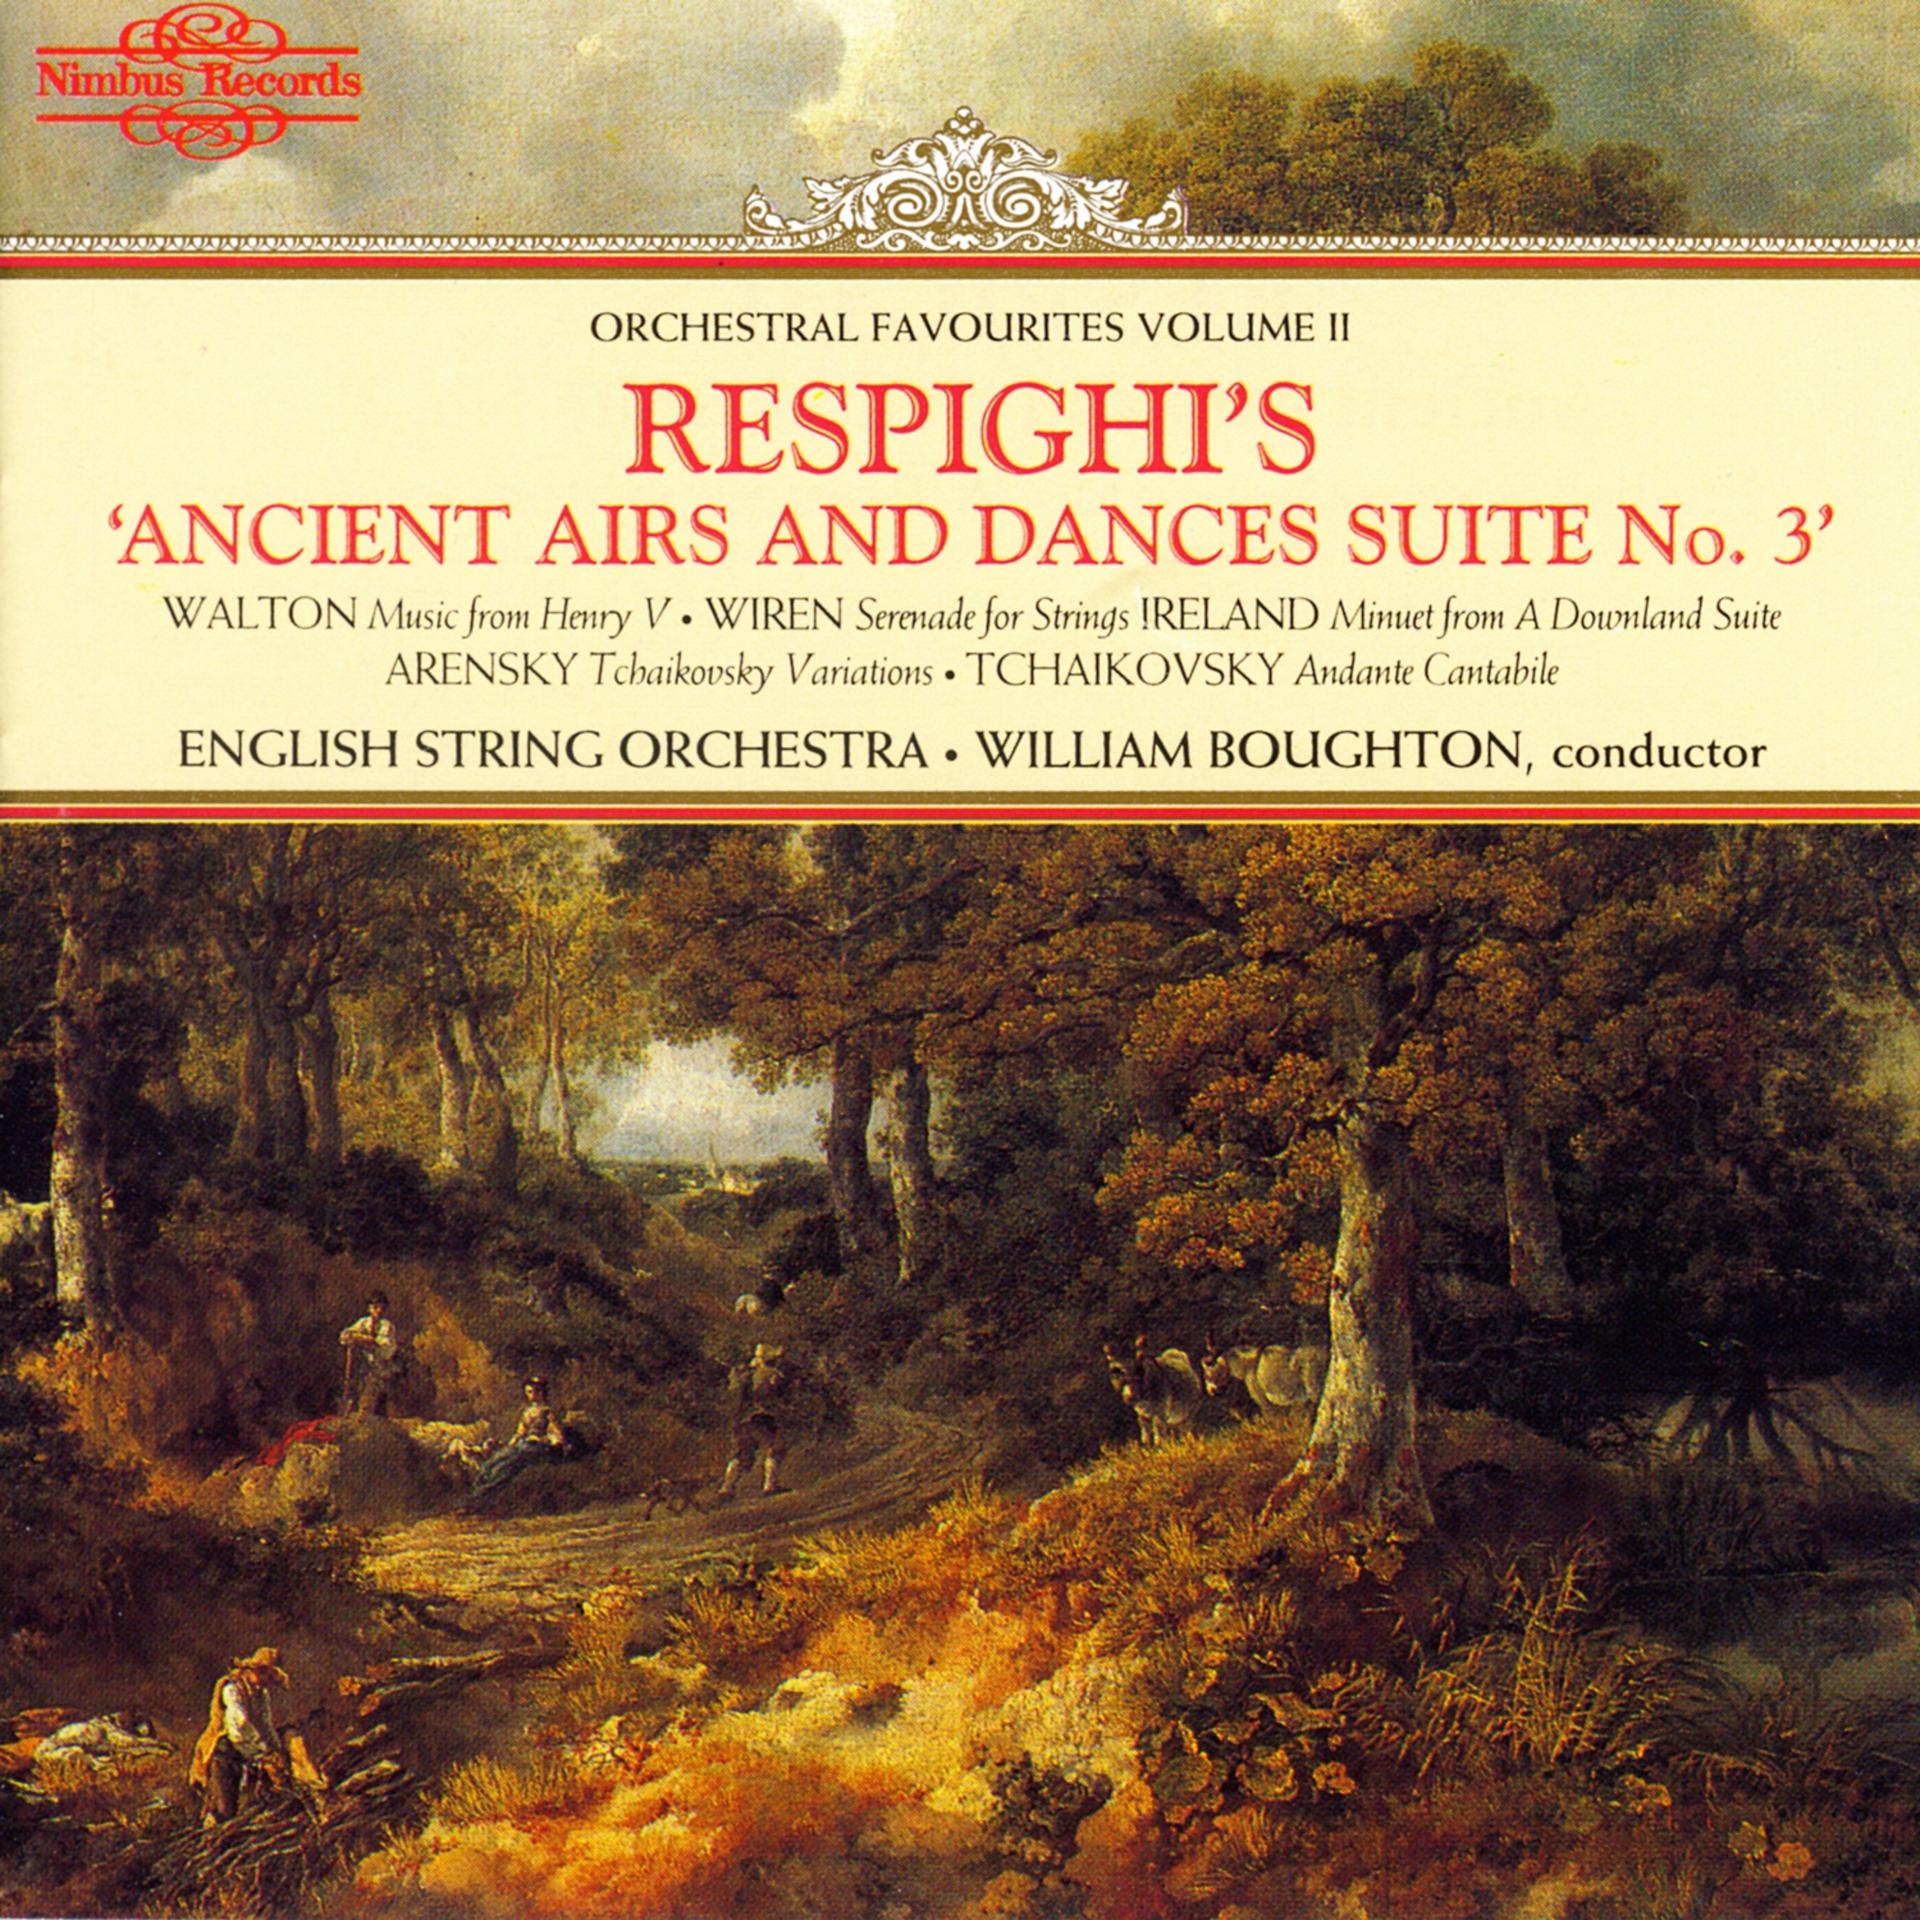 Постер альбома Respighi's Ancient Airs and Dances Suite No. 3: Orchestral Favourites, Vol. II